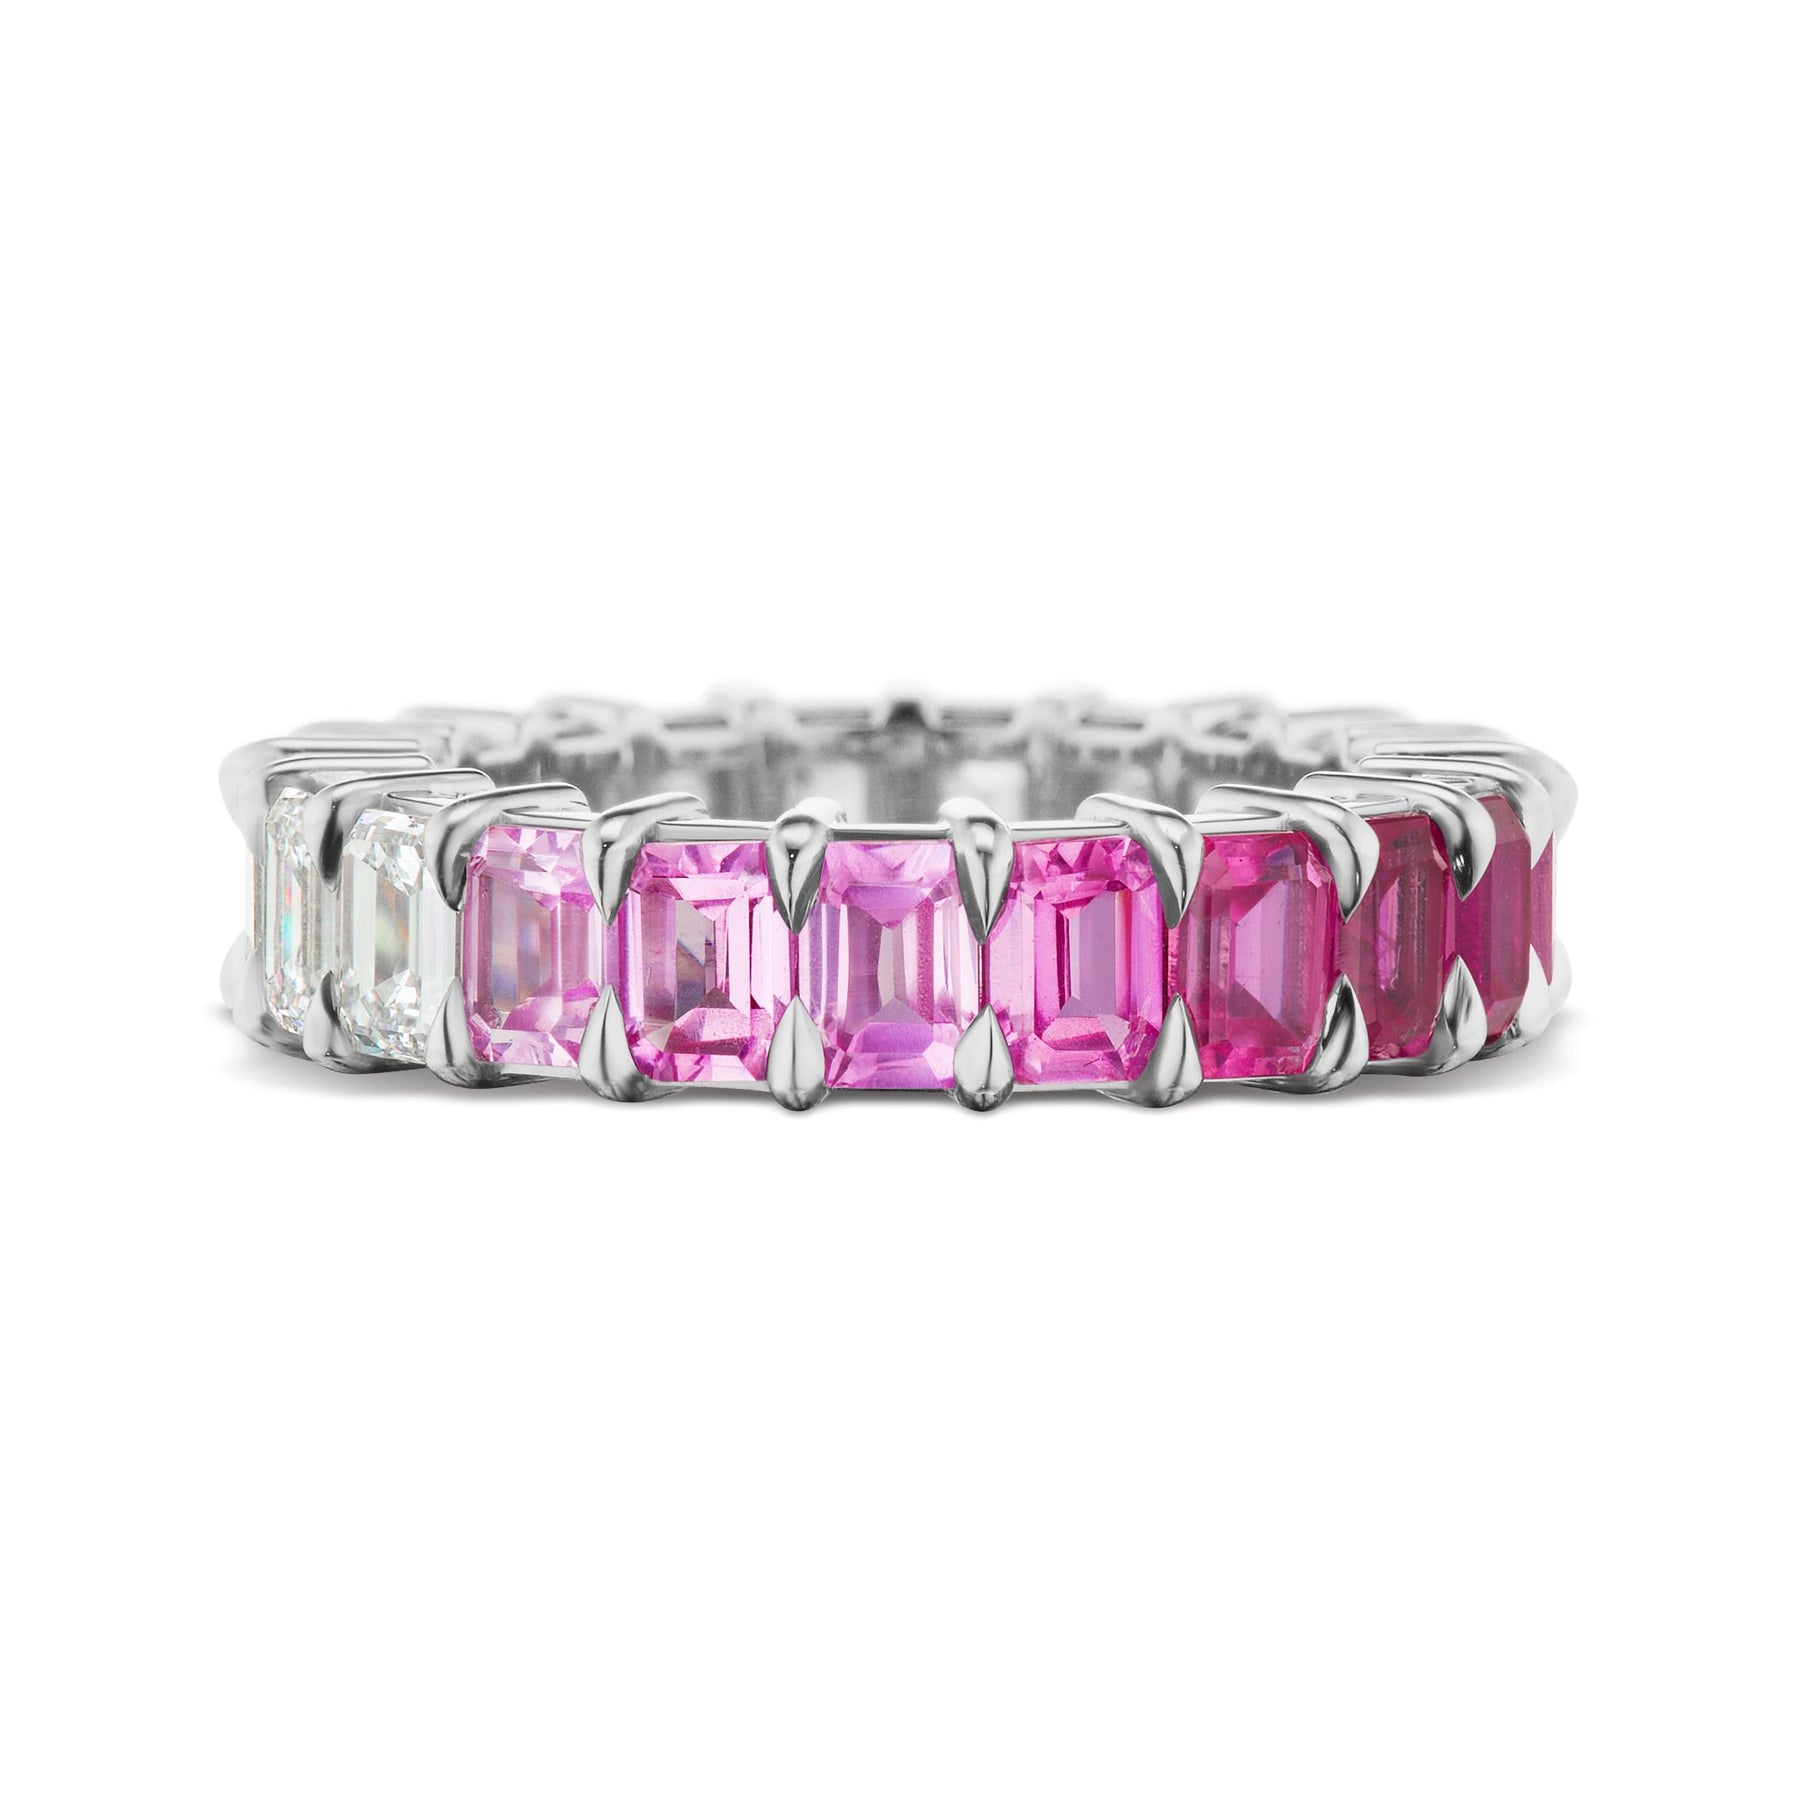 Ombré Eternity Band with Emerald Cut Pink Sapphires and White Diamonds